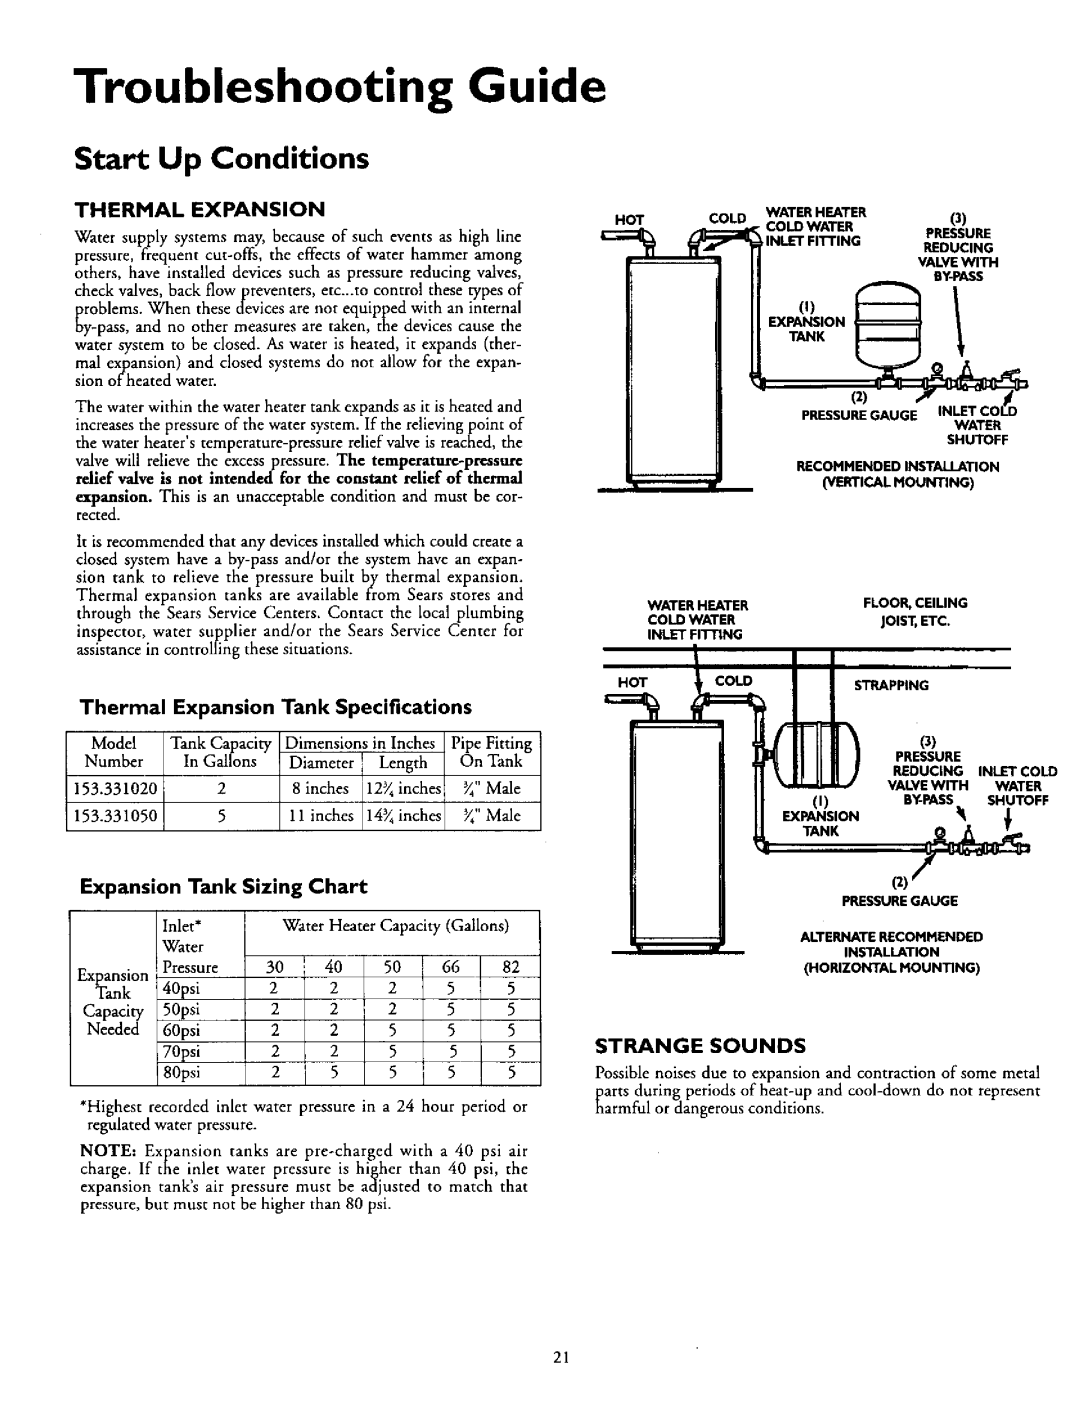 Kenmore 153.316454 Troubleshooting, Guide, Start, Conditions, Thermal Expansion Tank Specifications, Sizing, Chart 